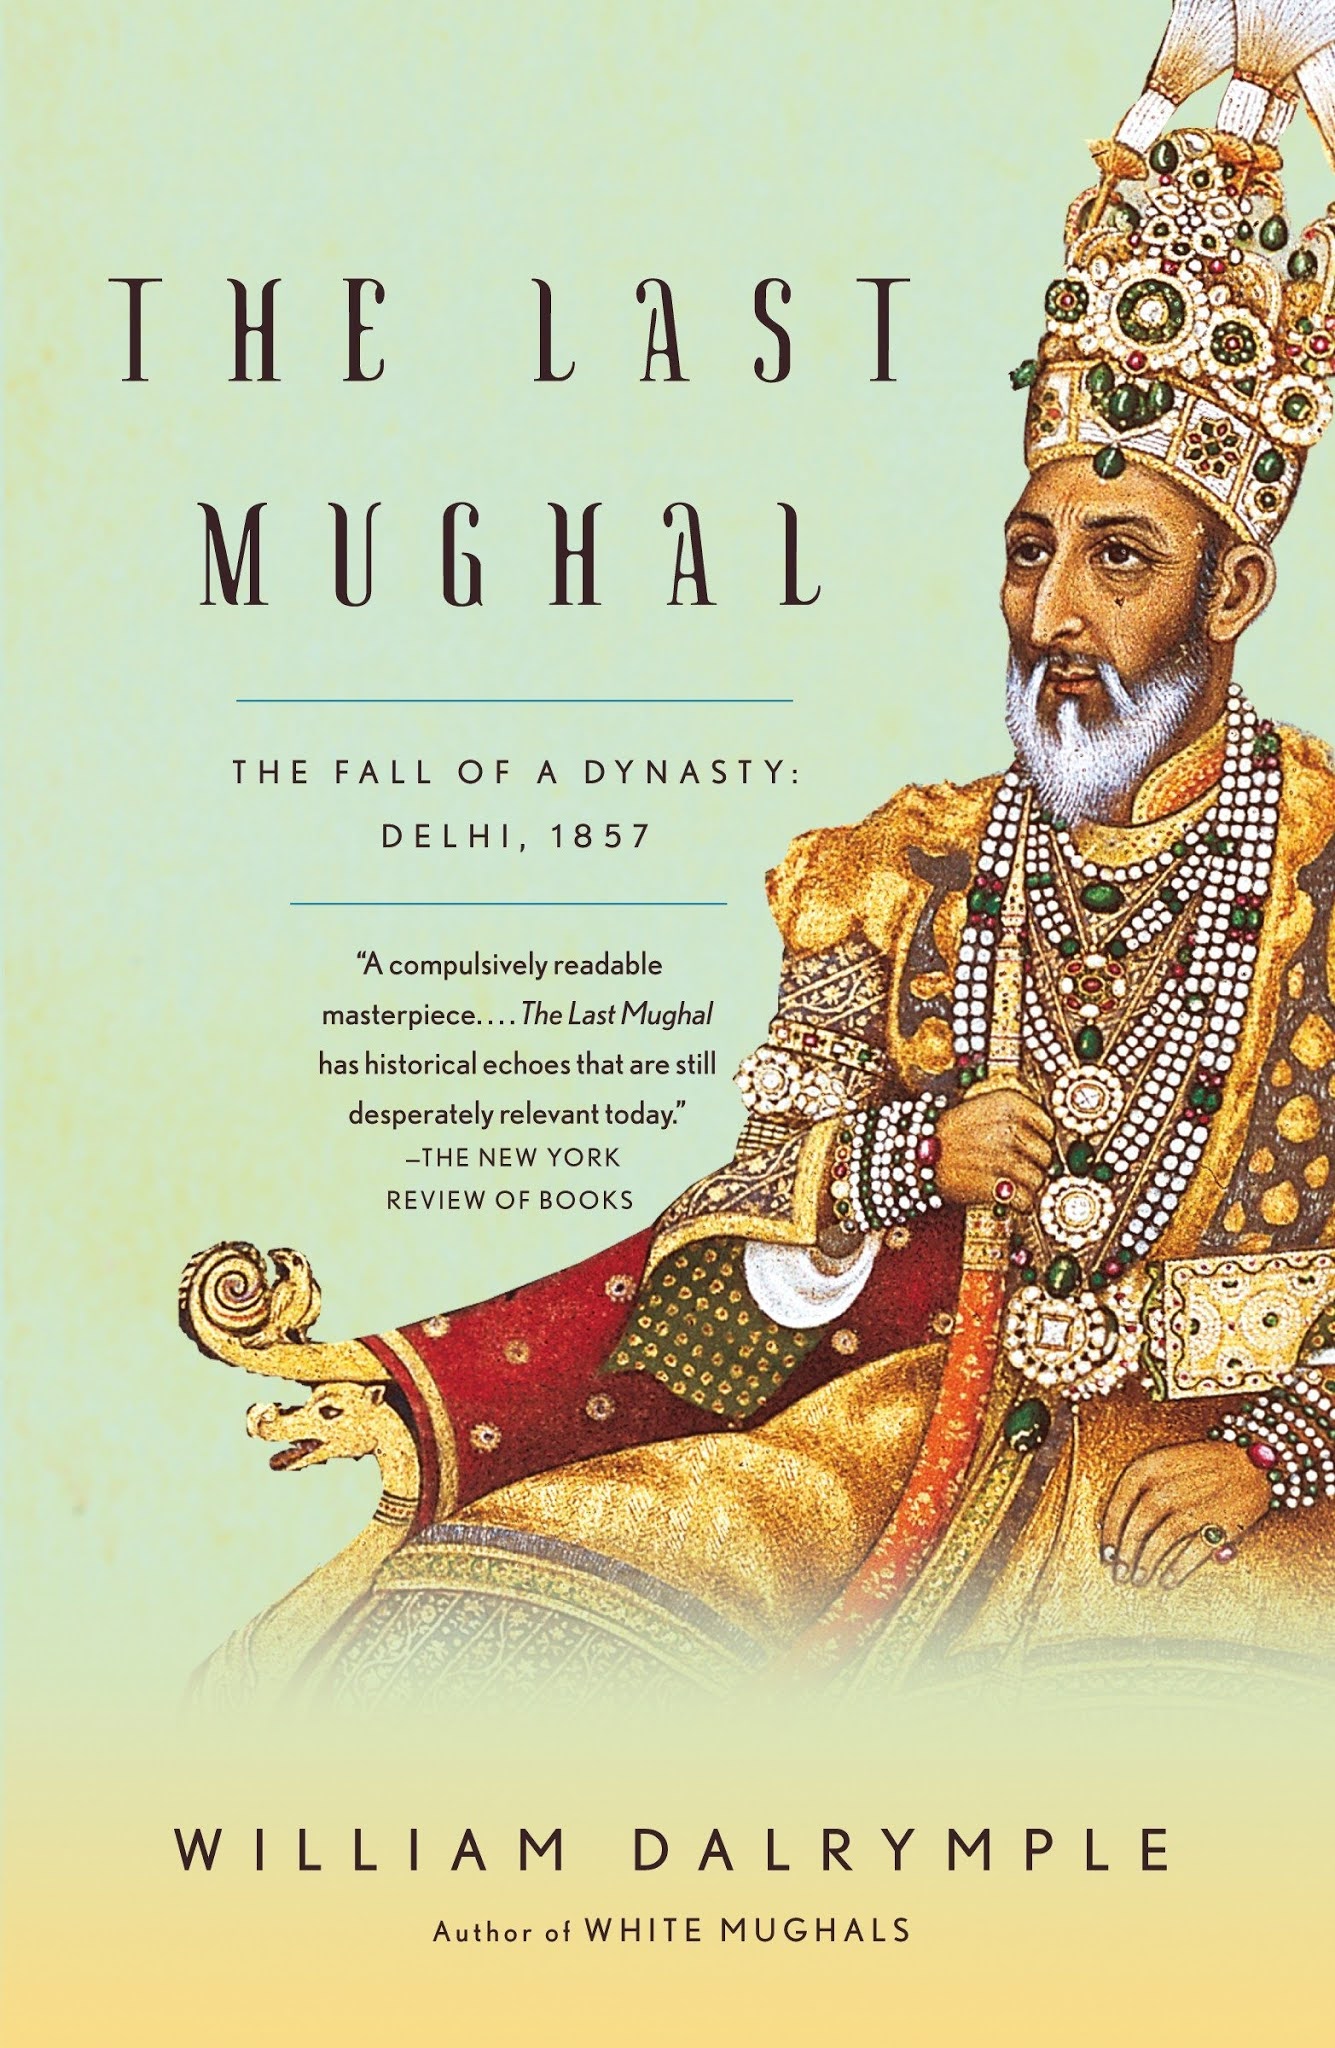 the last mughal book review